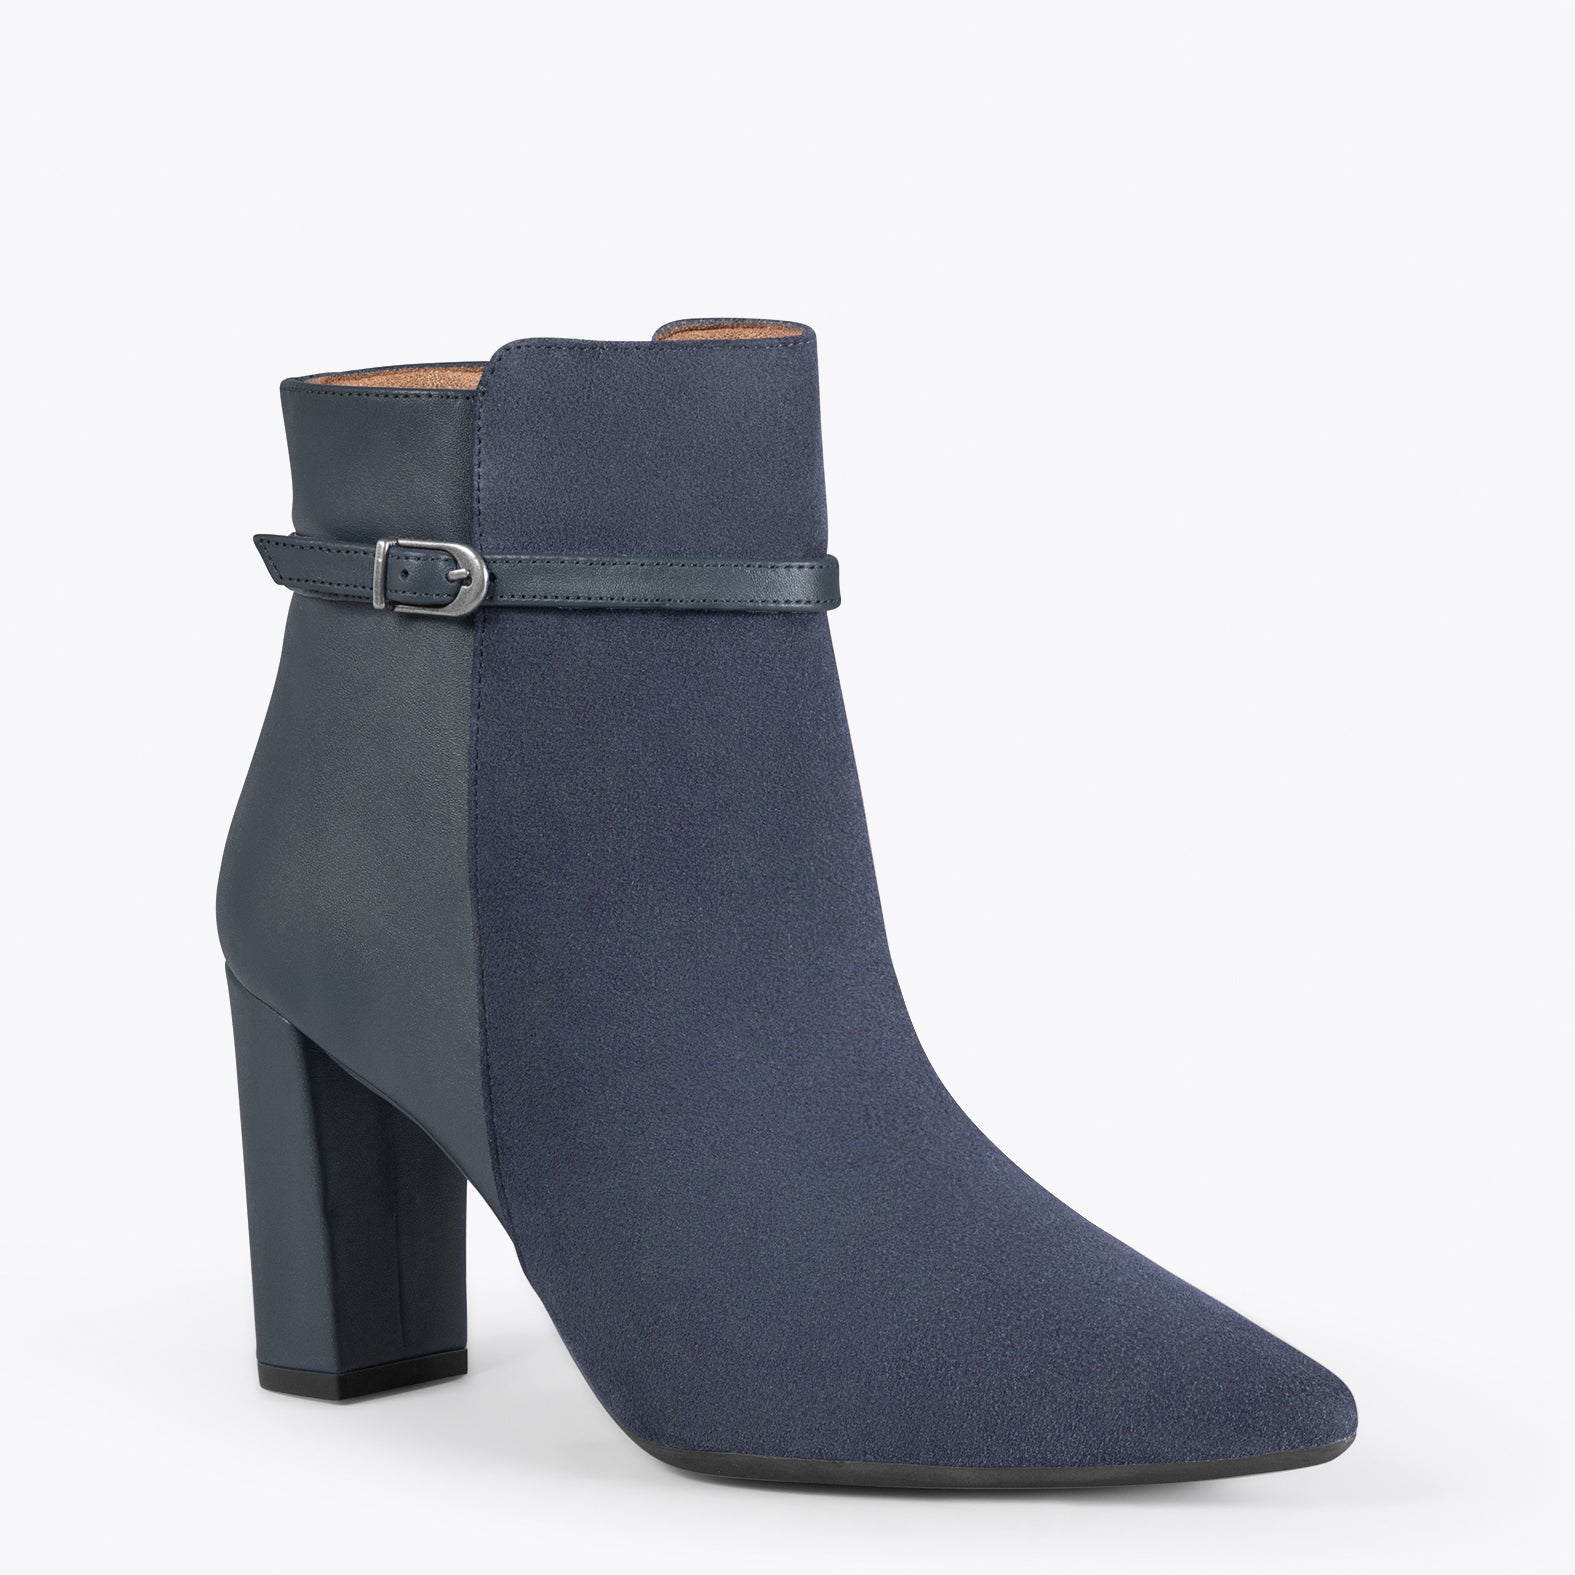 PRAGUE – NAVY high heel bootie with combined leather